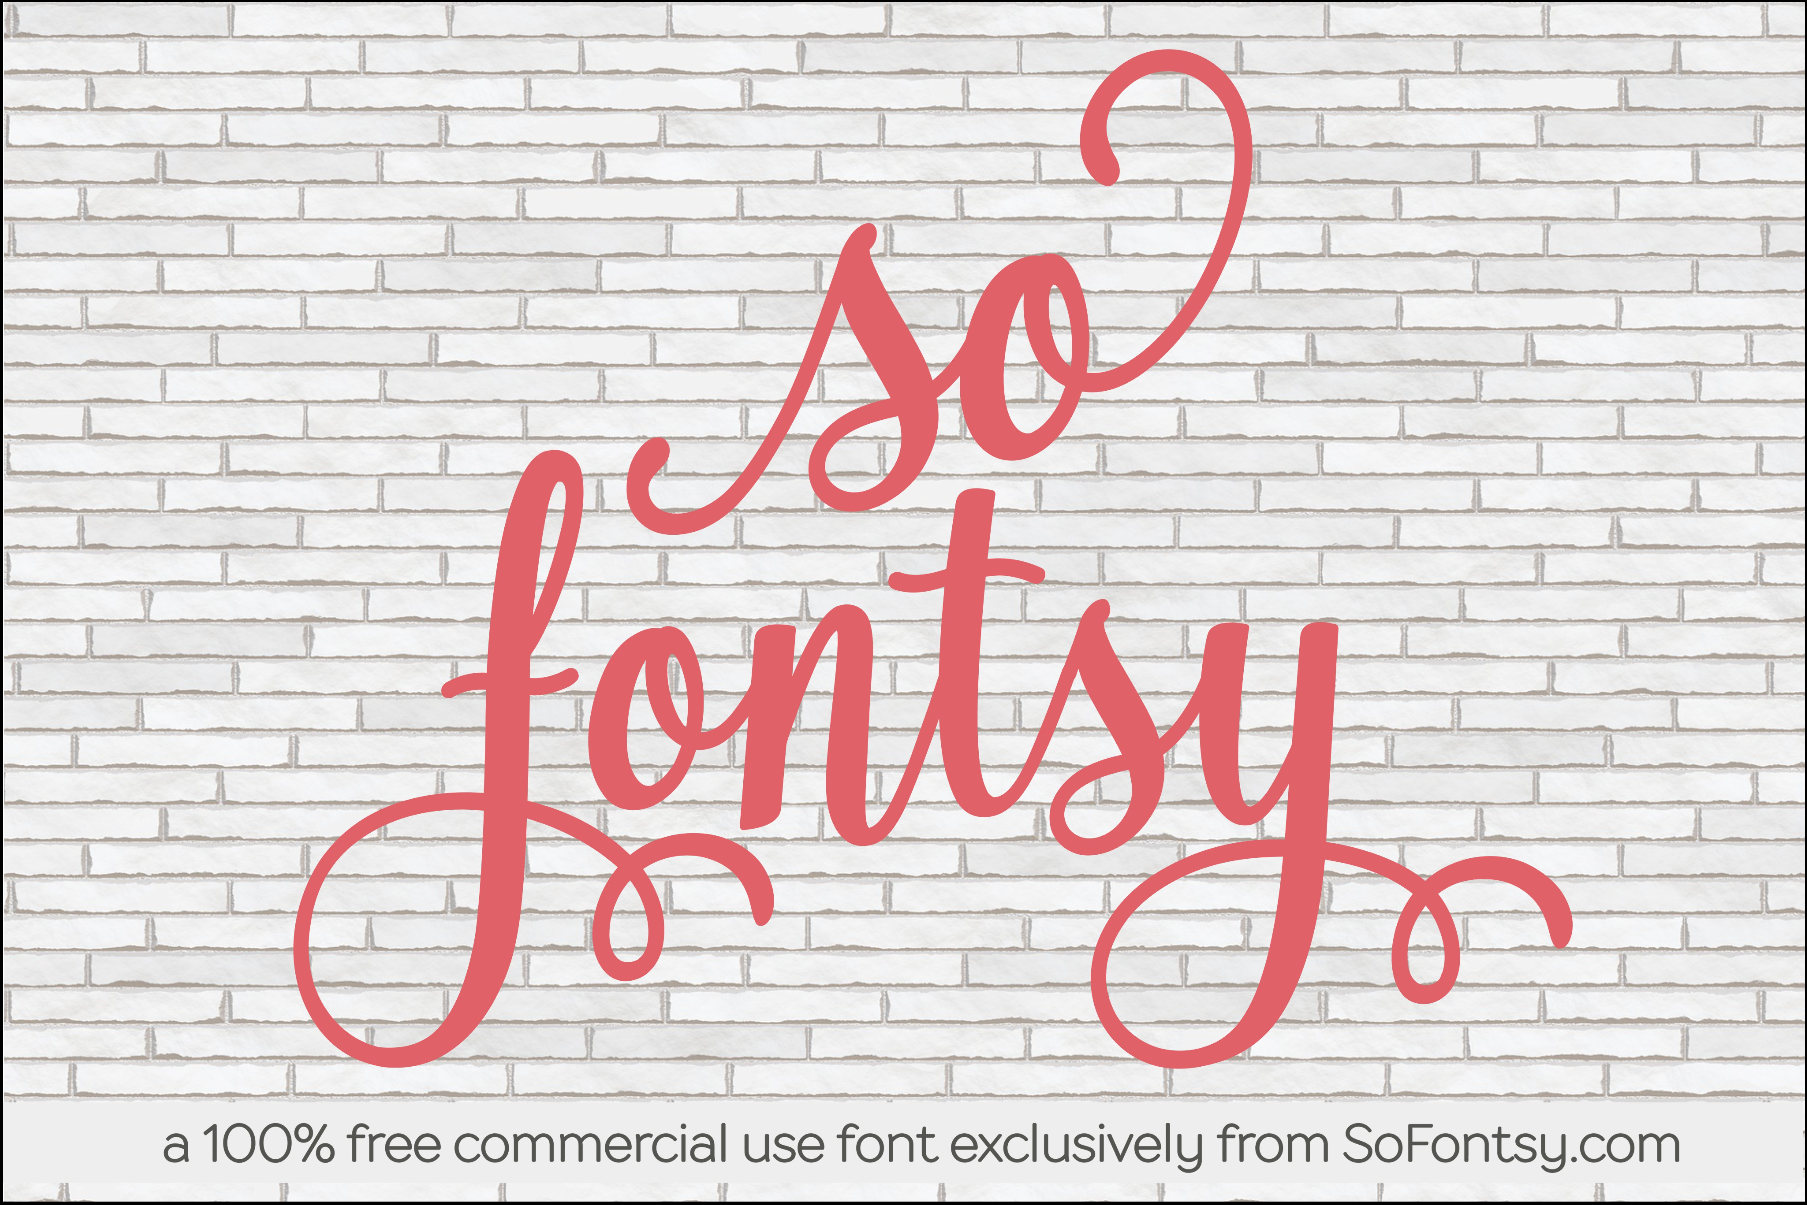 How to Use Sketch Pens with Silhouette Cameo 4 - So Fontsy